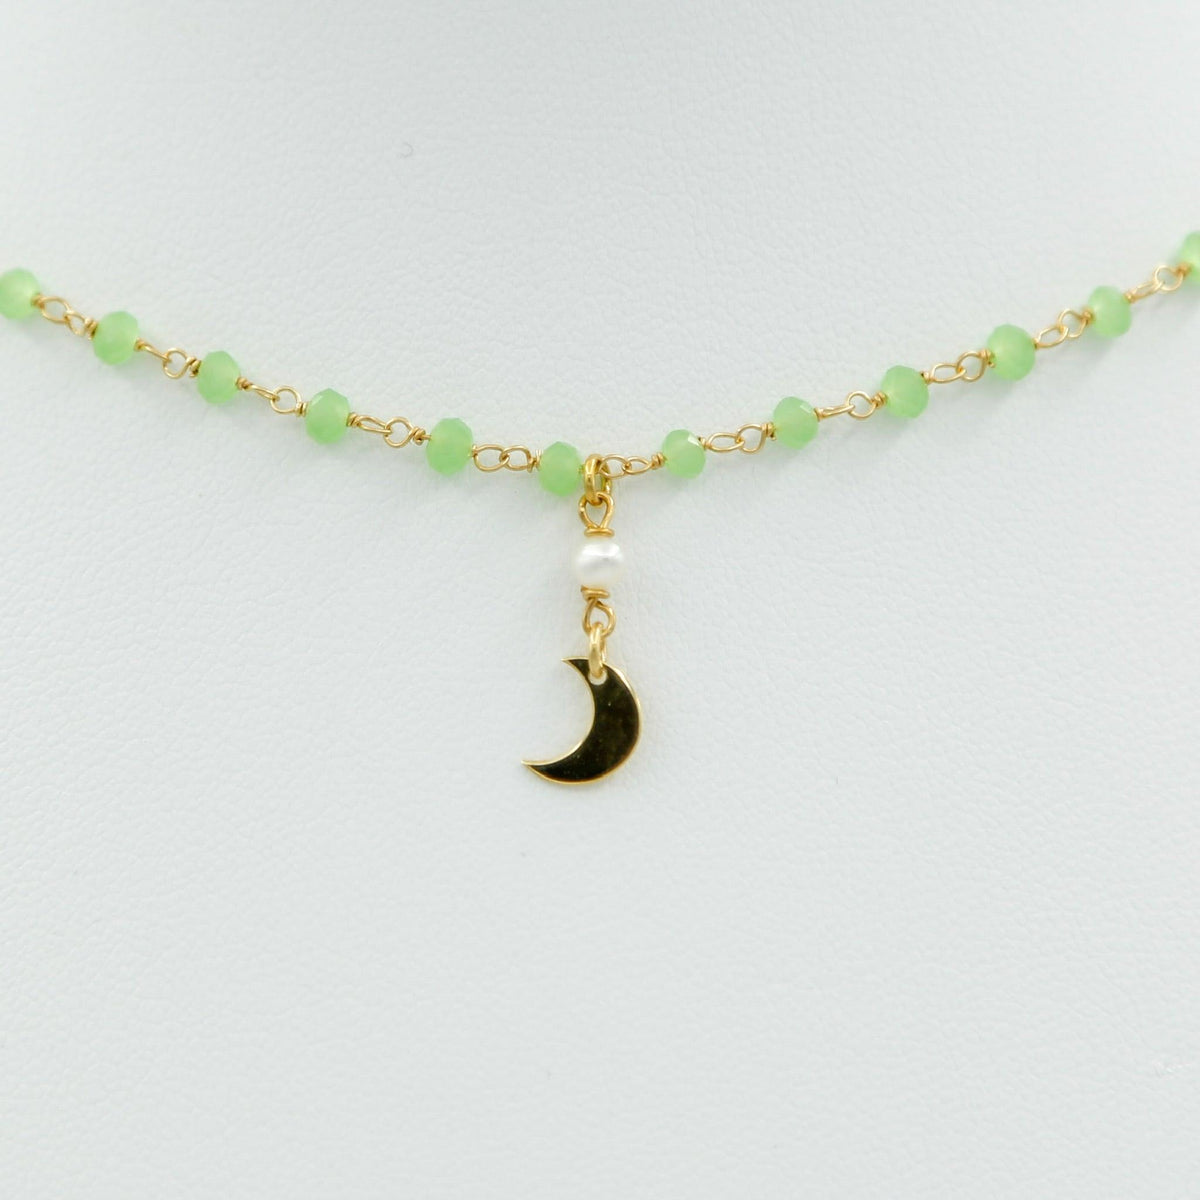 Lime Green Beads Choker Necklace with Half Moon Pendant - Vita Isola